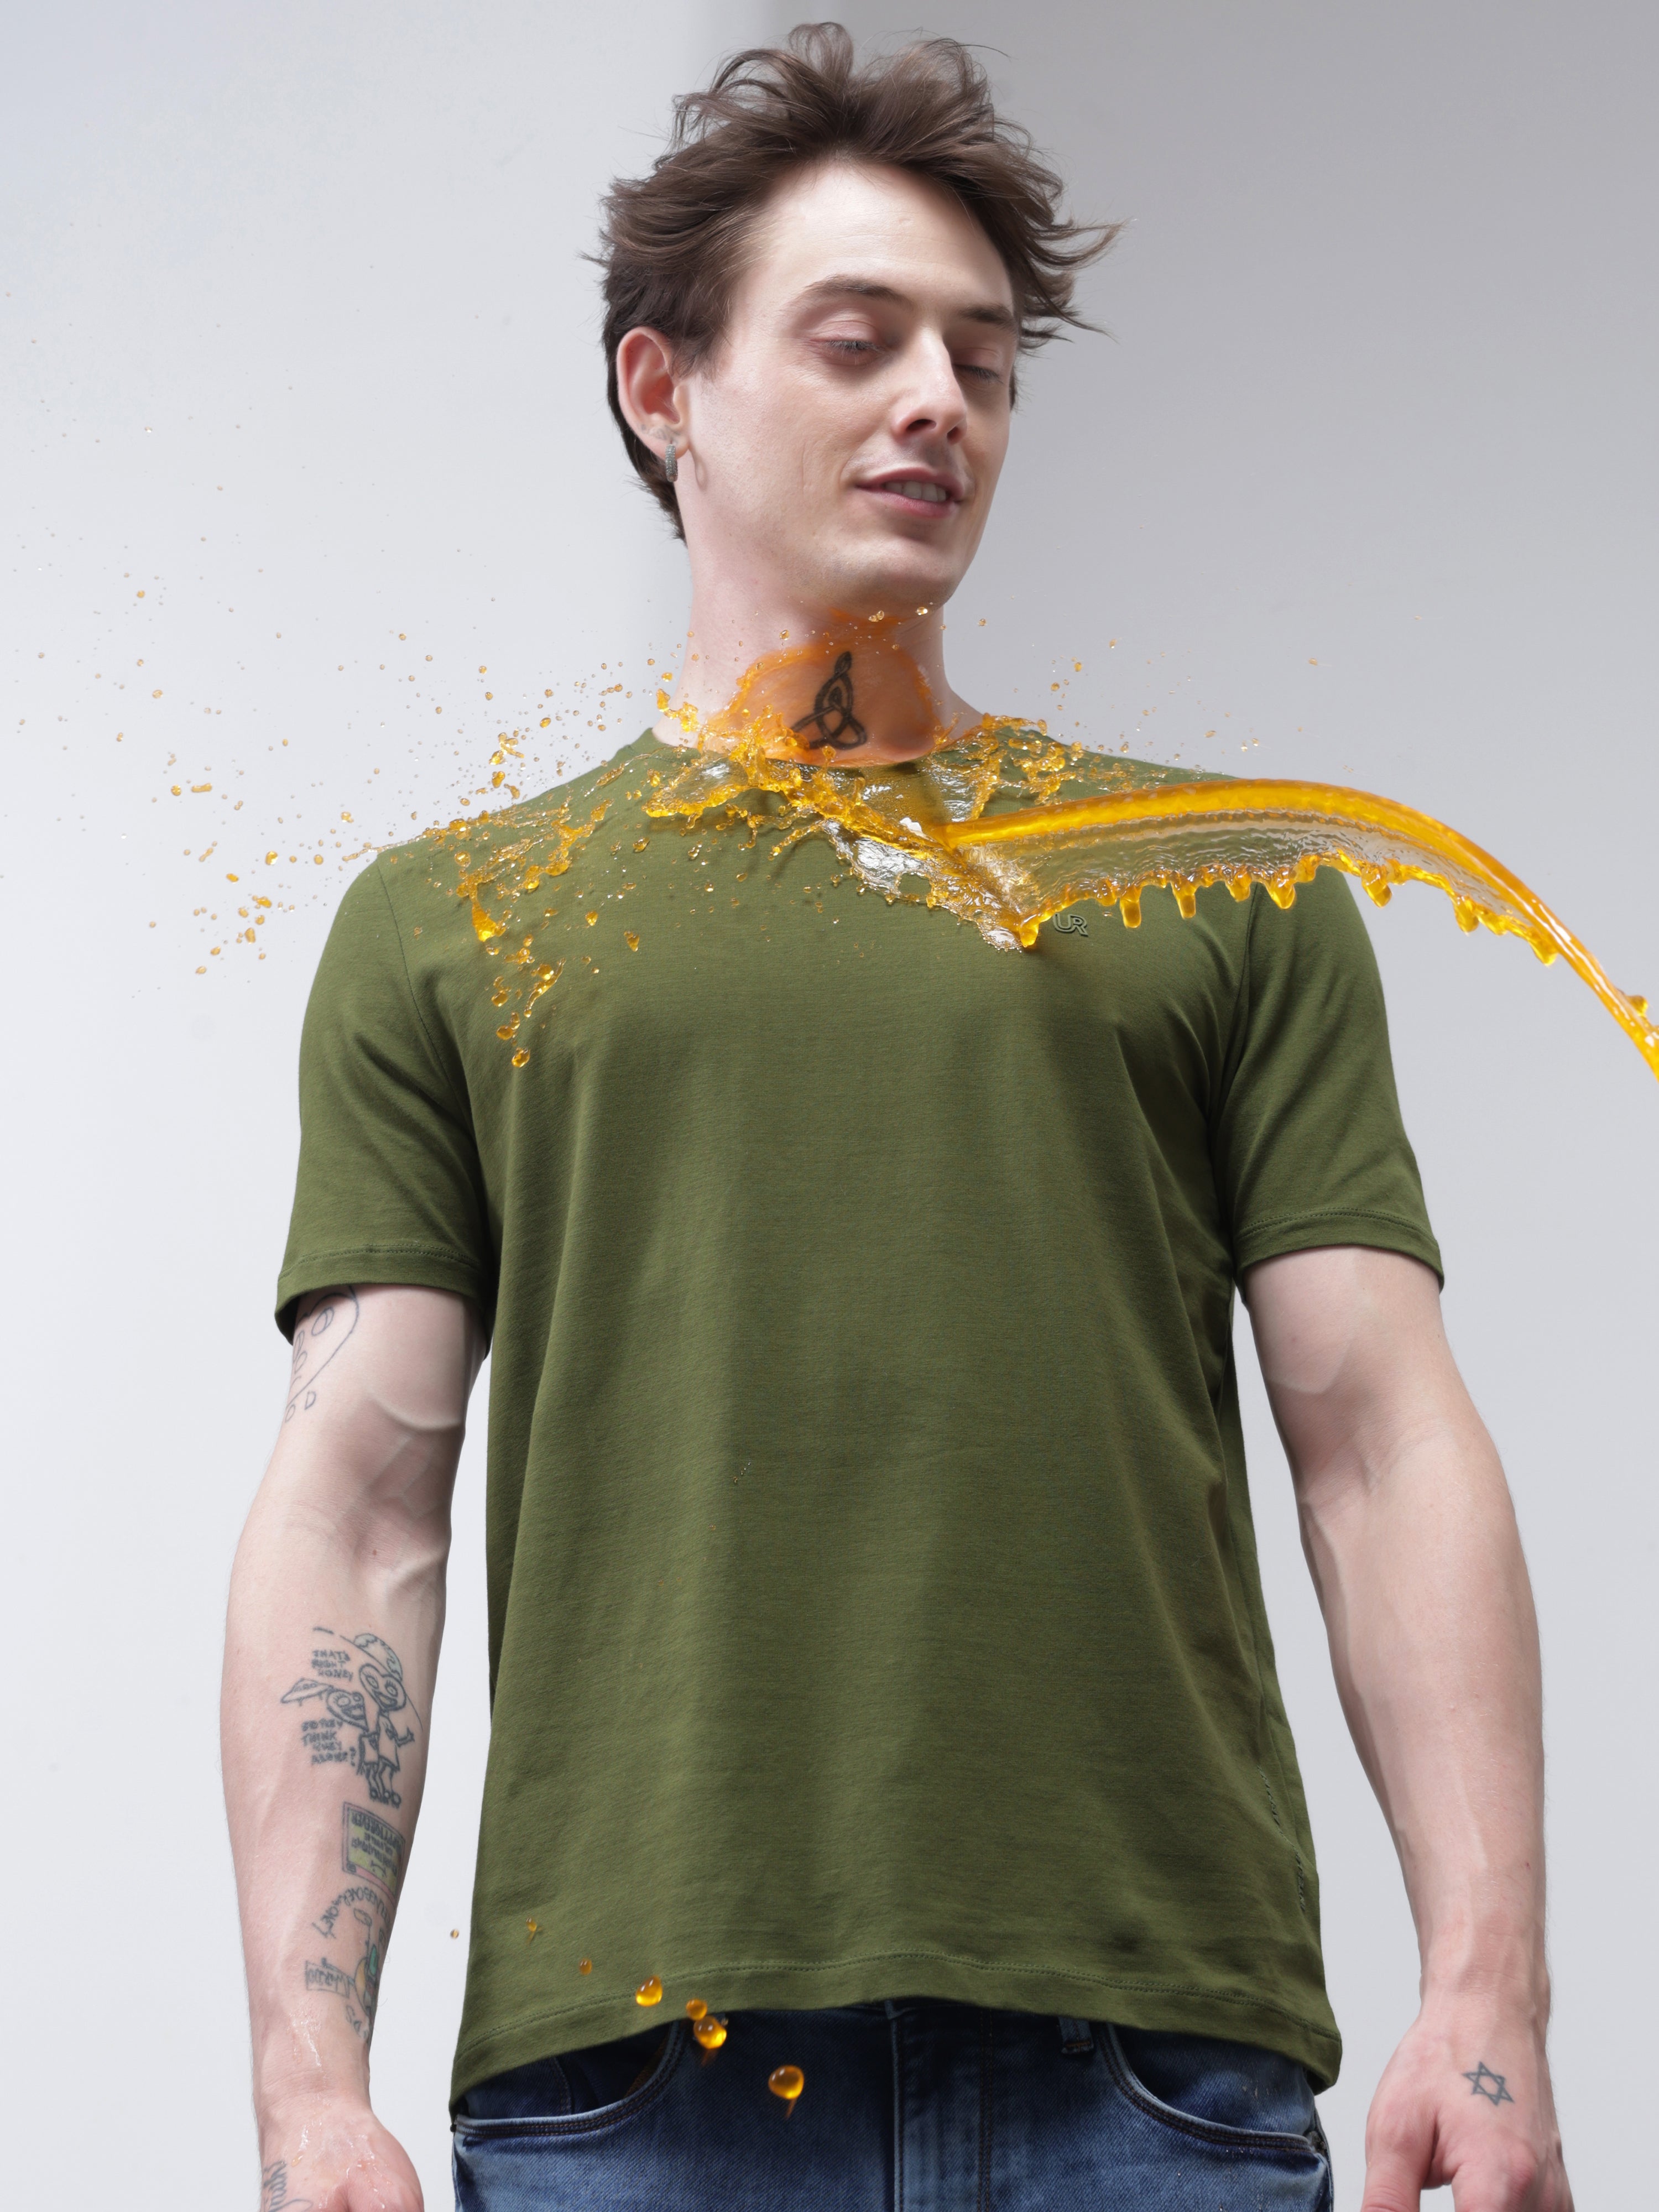 Man wearing green Turms round-neck T-shirt with stain-resistant and water-resistant properties splashed with liquid.